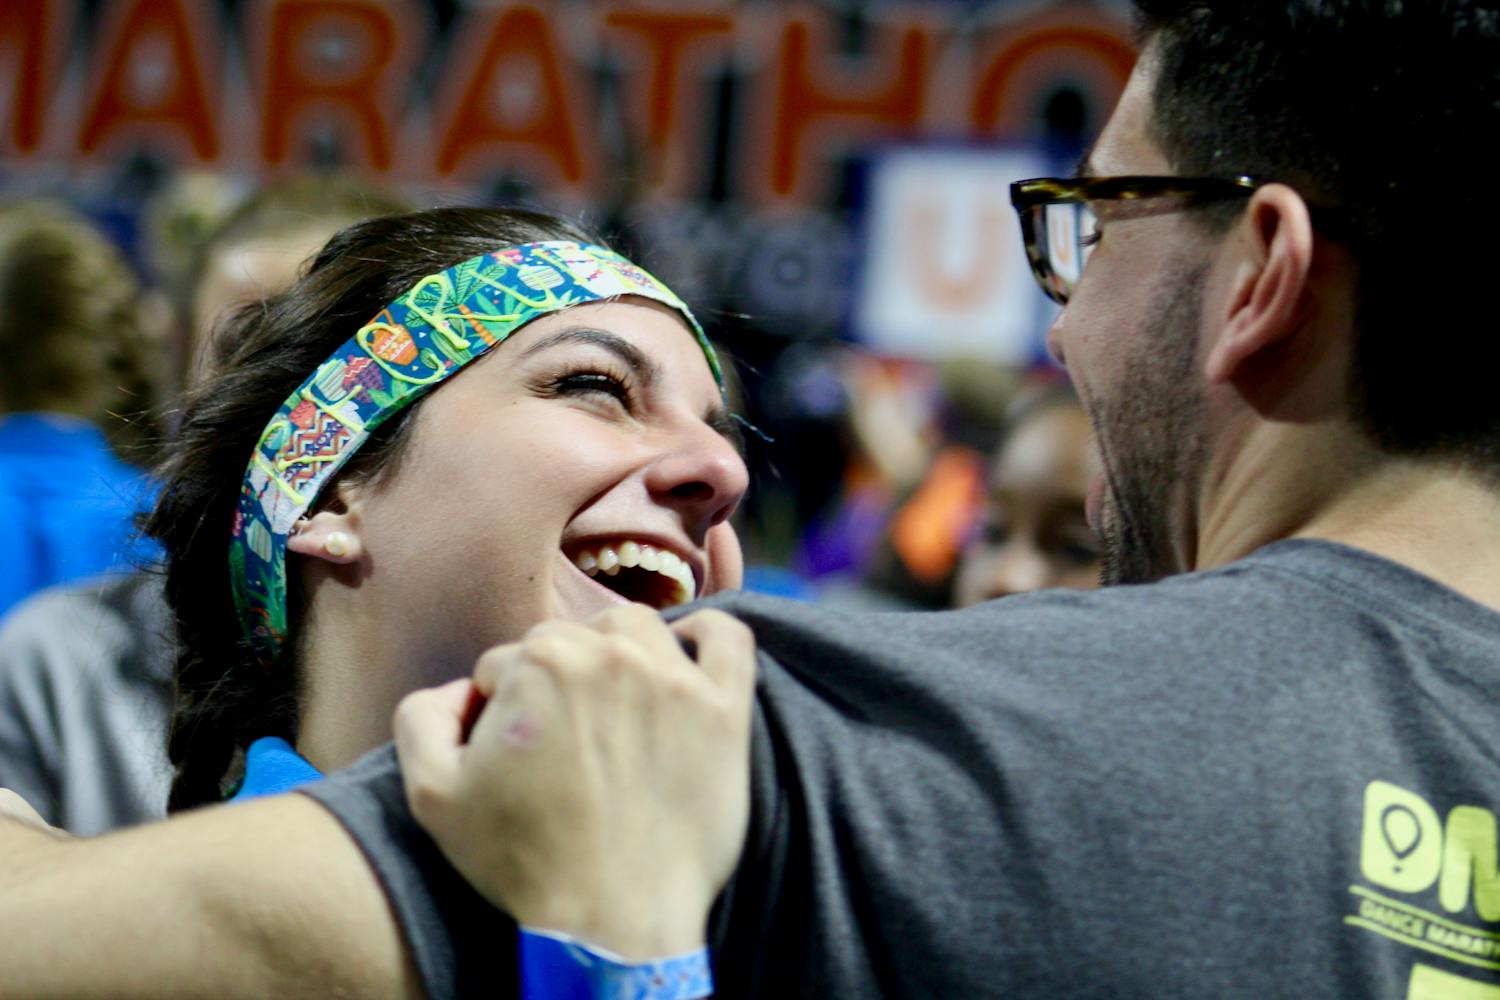 After 26.2 hours of dancing at the O’Connell Center, UF Dance Marathon organizers held up white signs to reveal the organization had raised $3,026,420.19 for the Children’s Miracle Network. Last year, $2.7 million were raised, said Ashleigh Braun, a captain on the Dance Marathon public relations team.